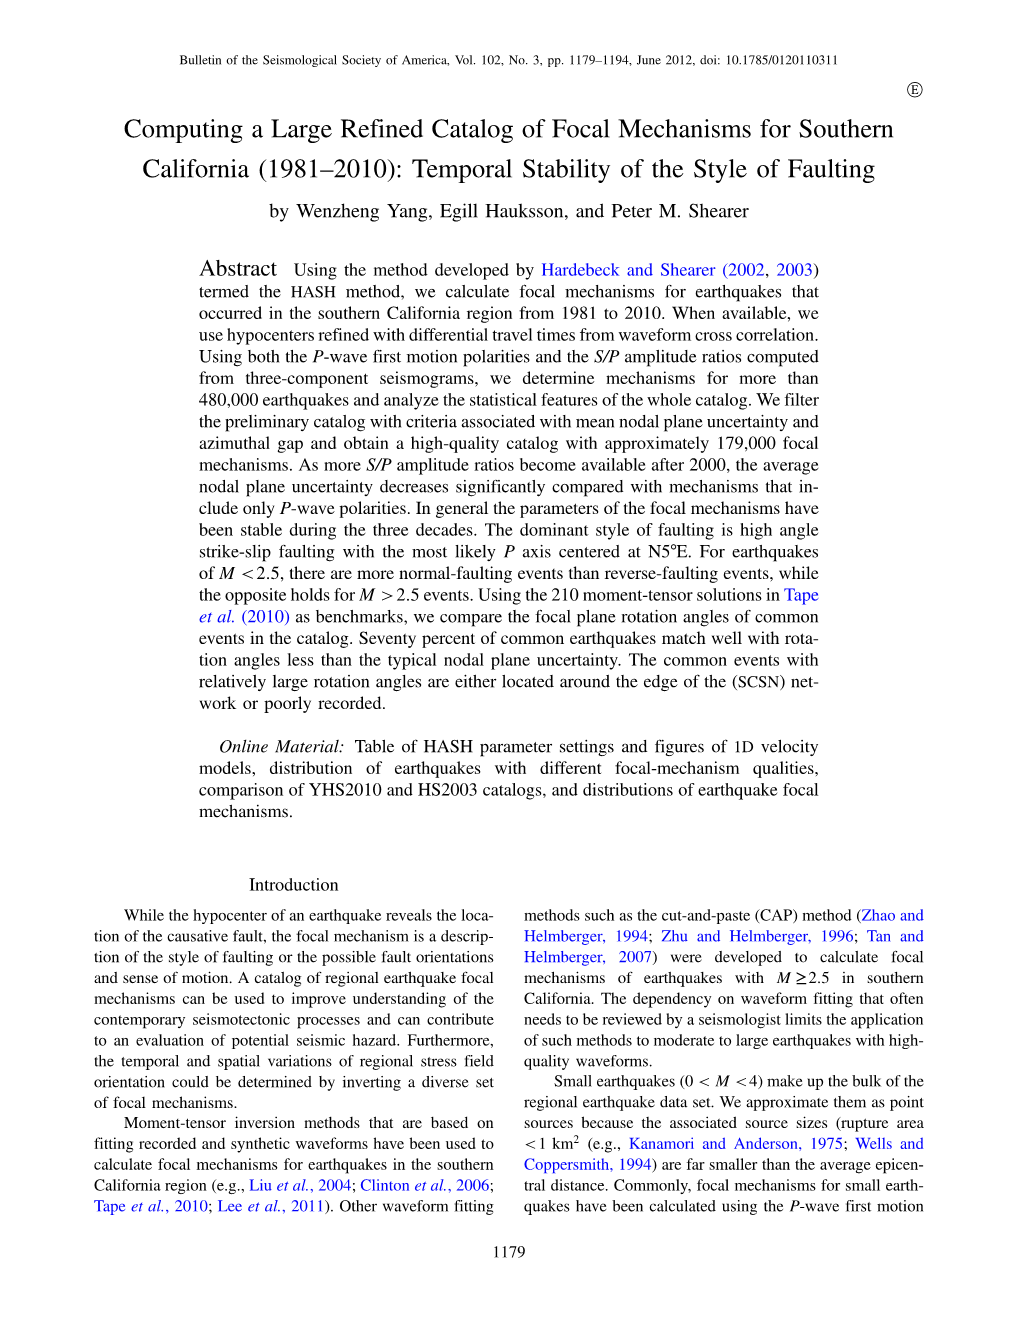 Computing a Large Refined Catalog of Focal Mechanisms for Southern California